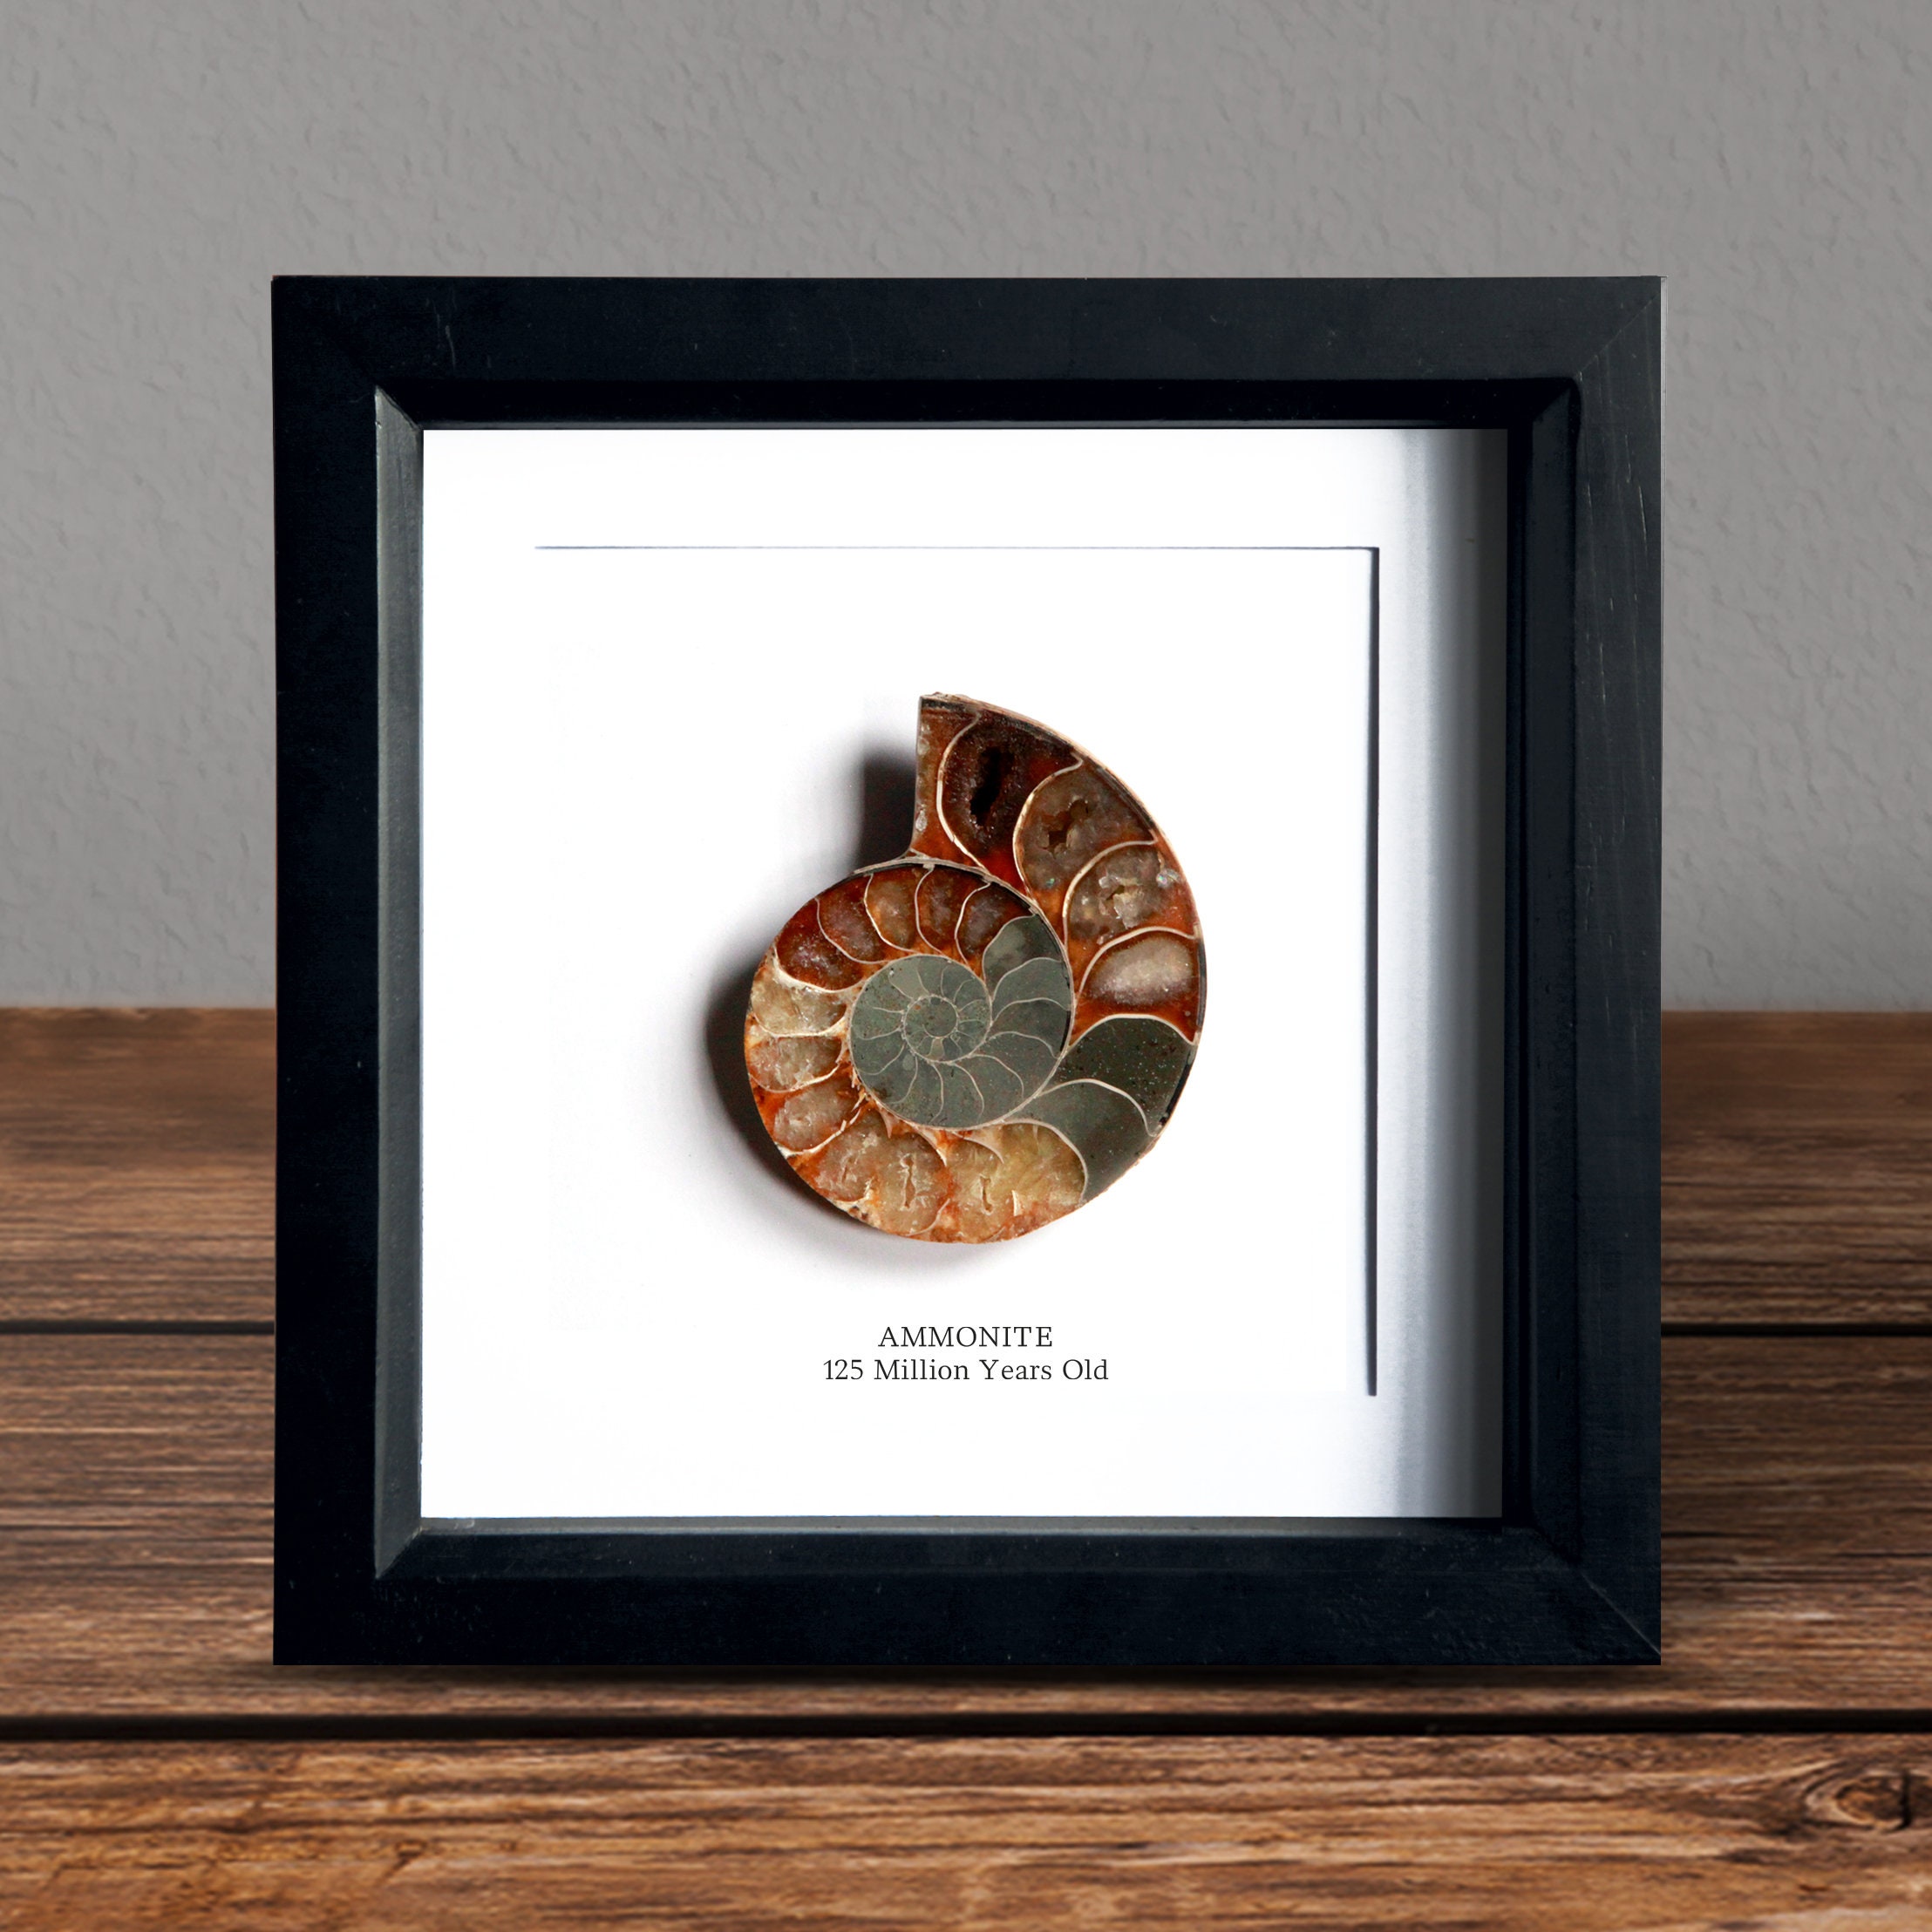 Polished and Framed Ancient Ammonite